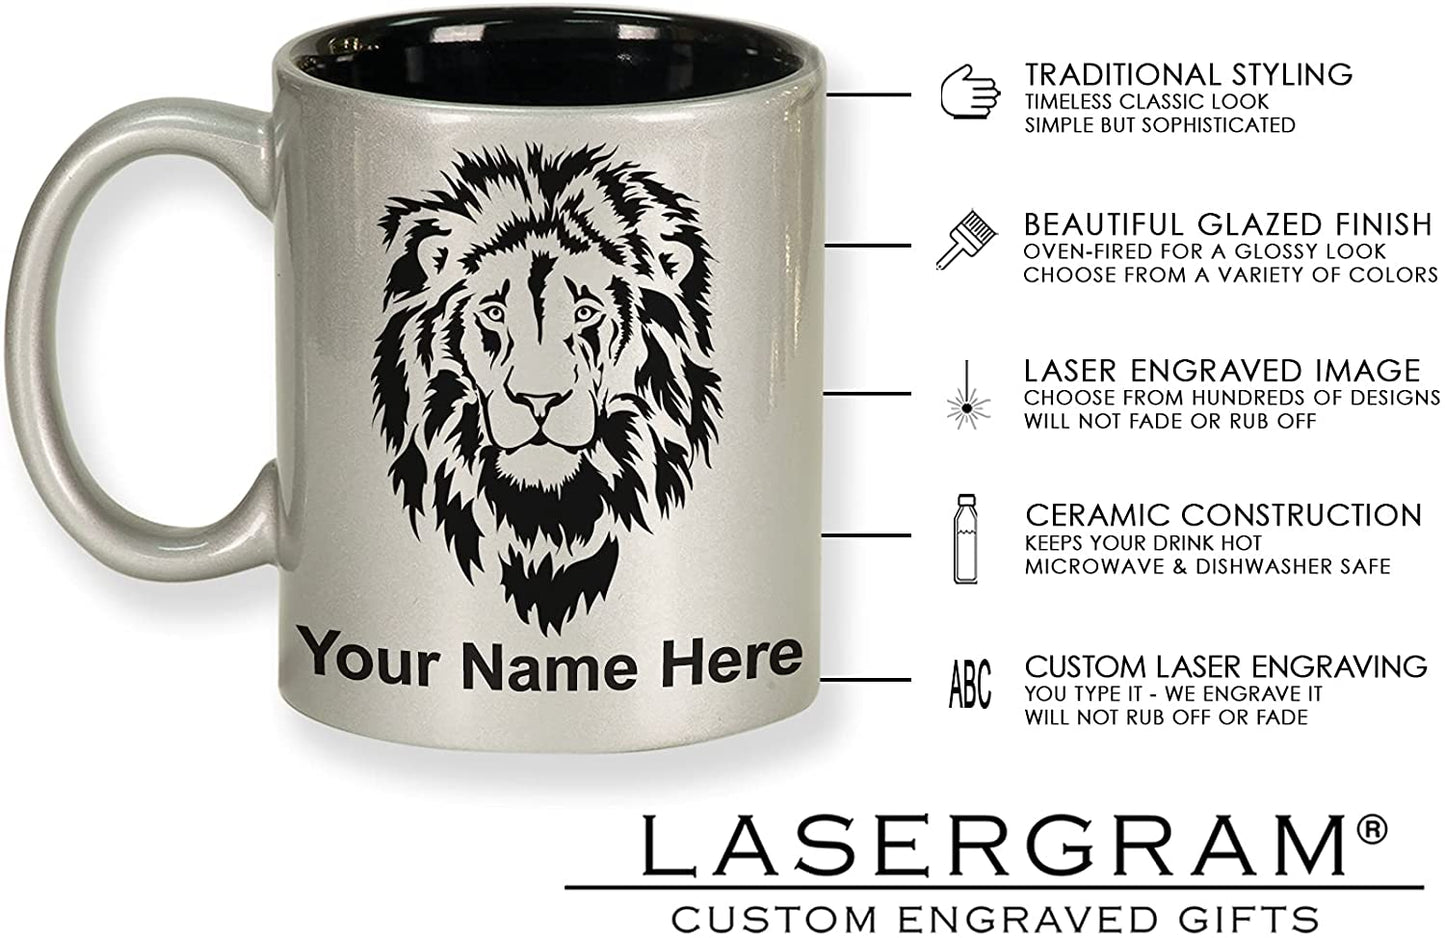 11oz Round Ceramic Coffee Mug, RD Registered Dietitian, Personalized Engraving Included